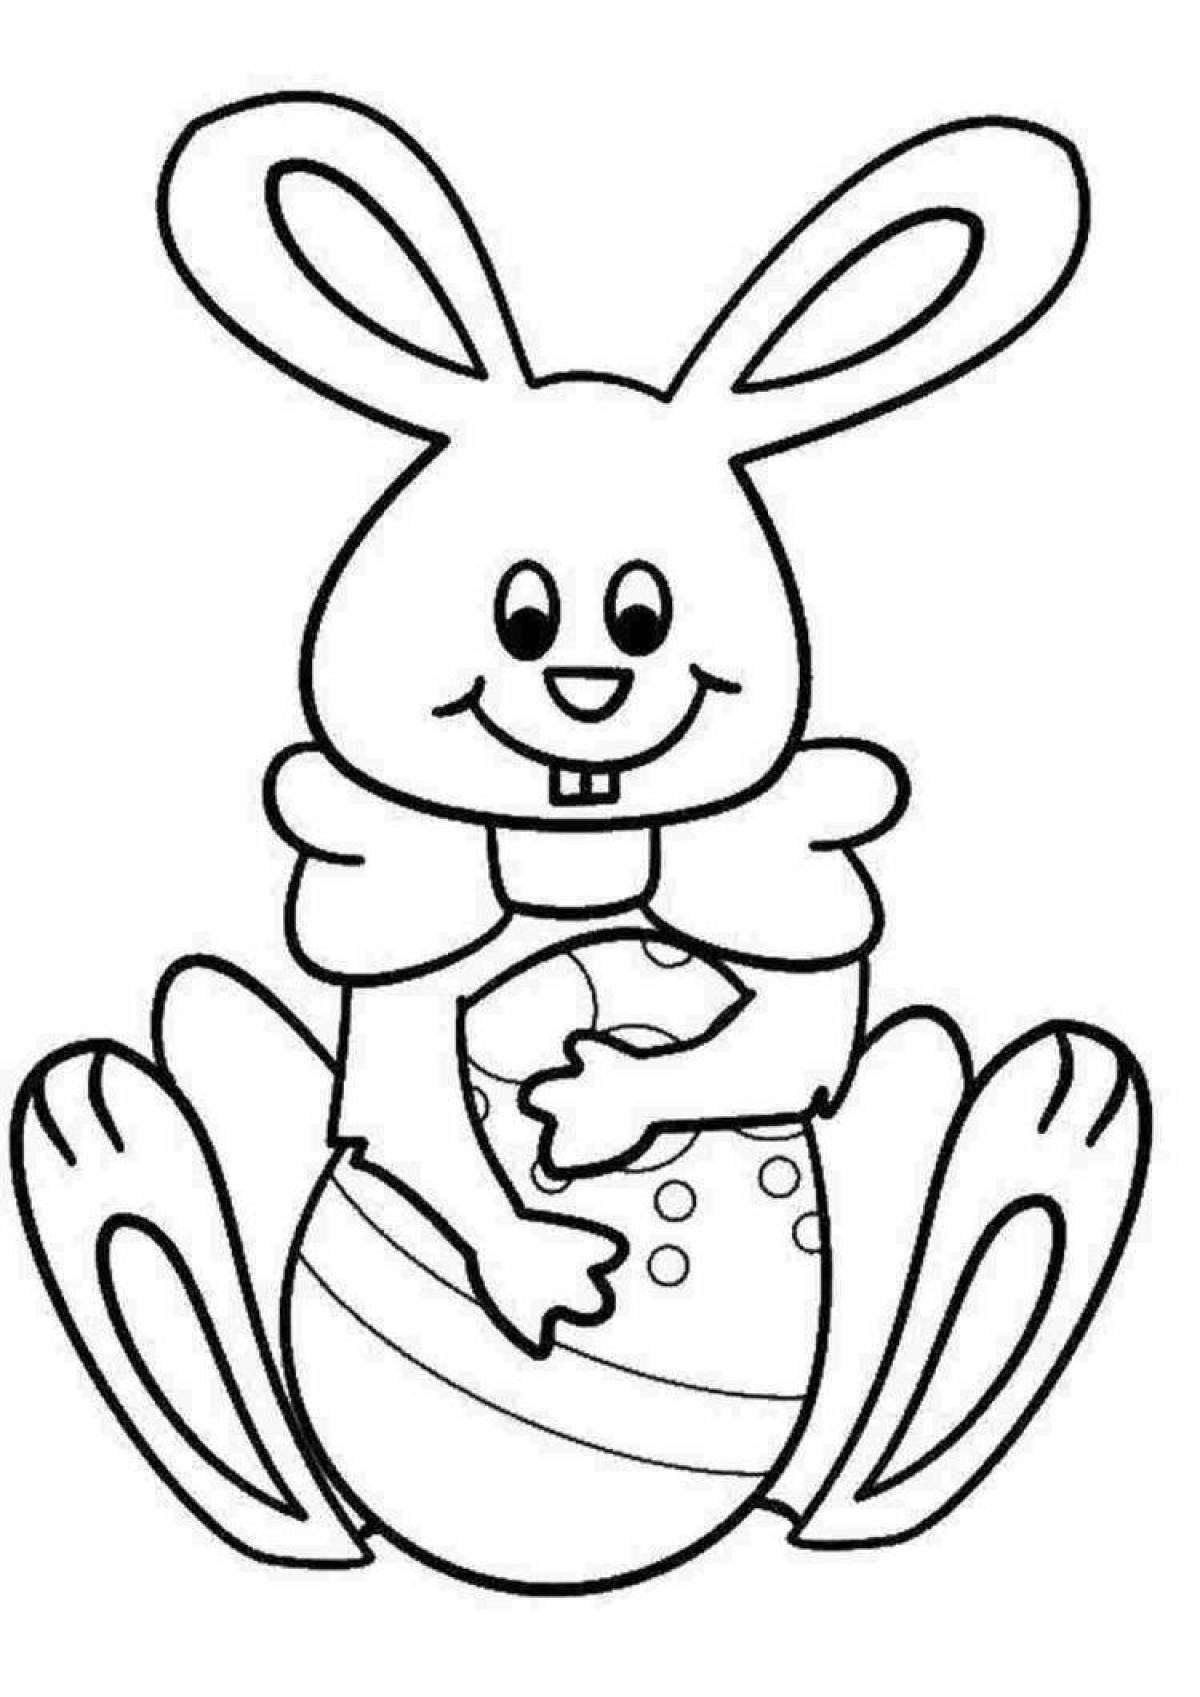 Fun coloring book with rabbit